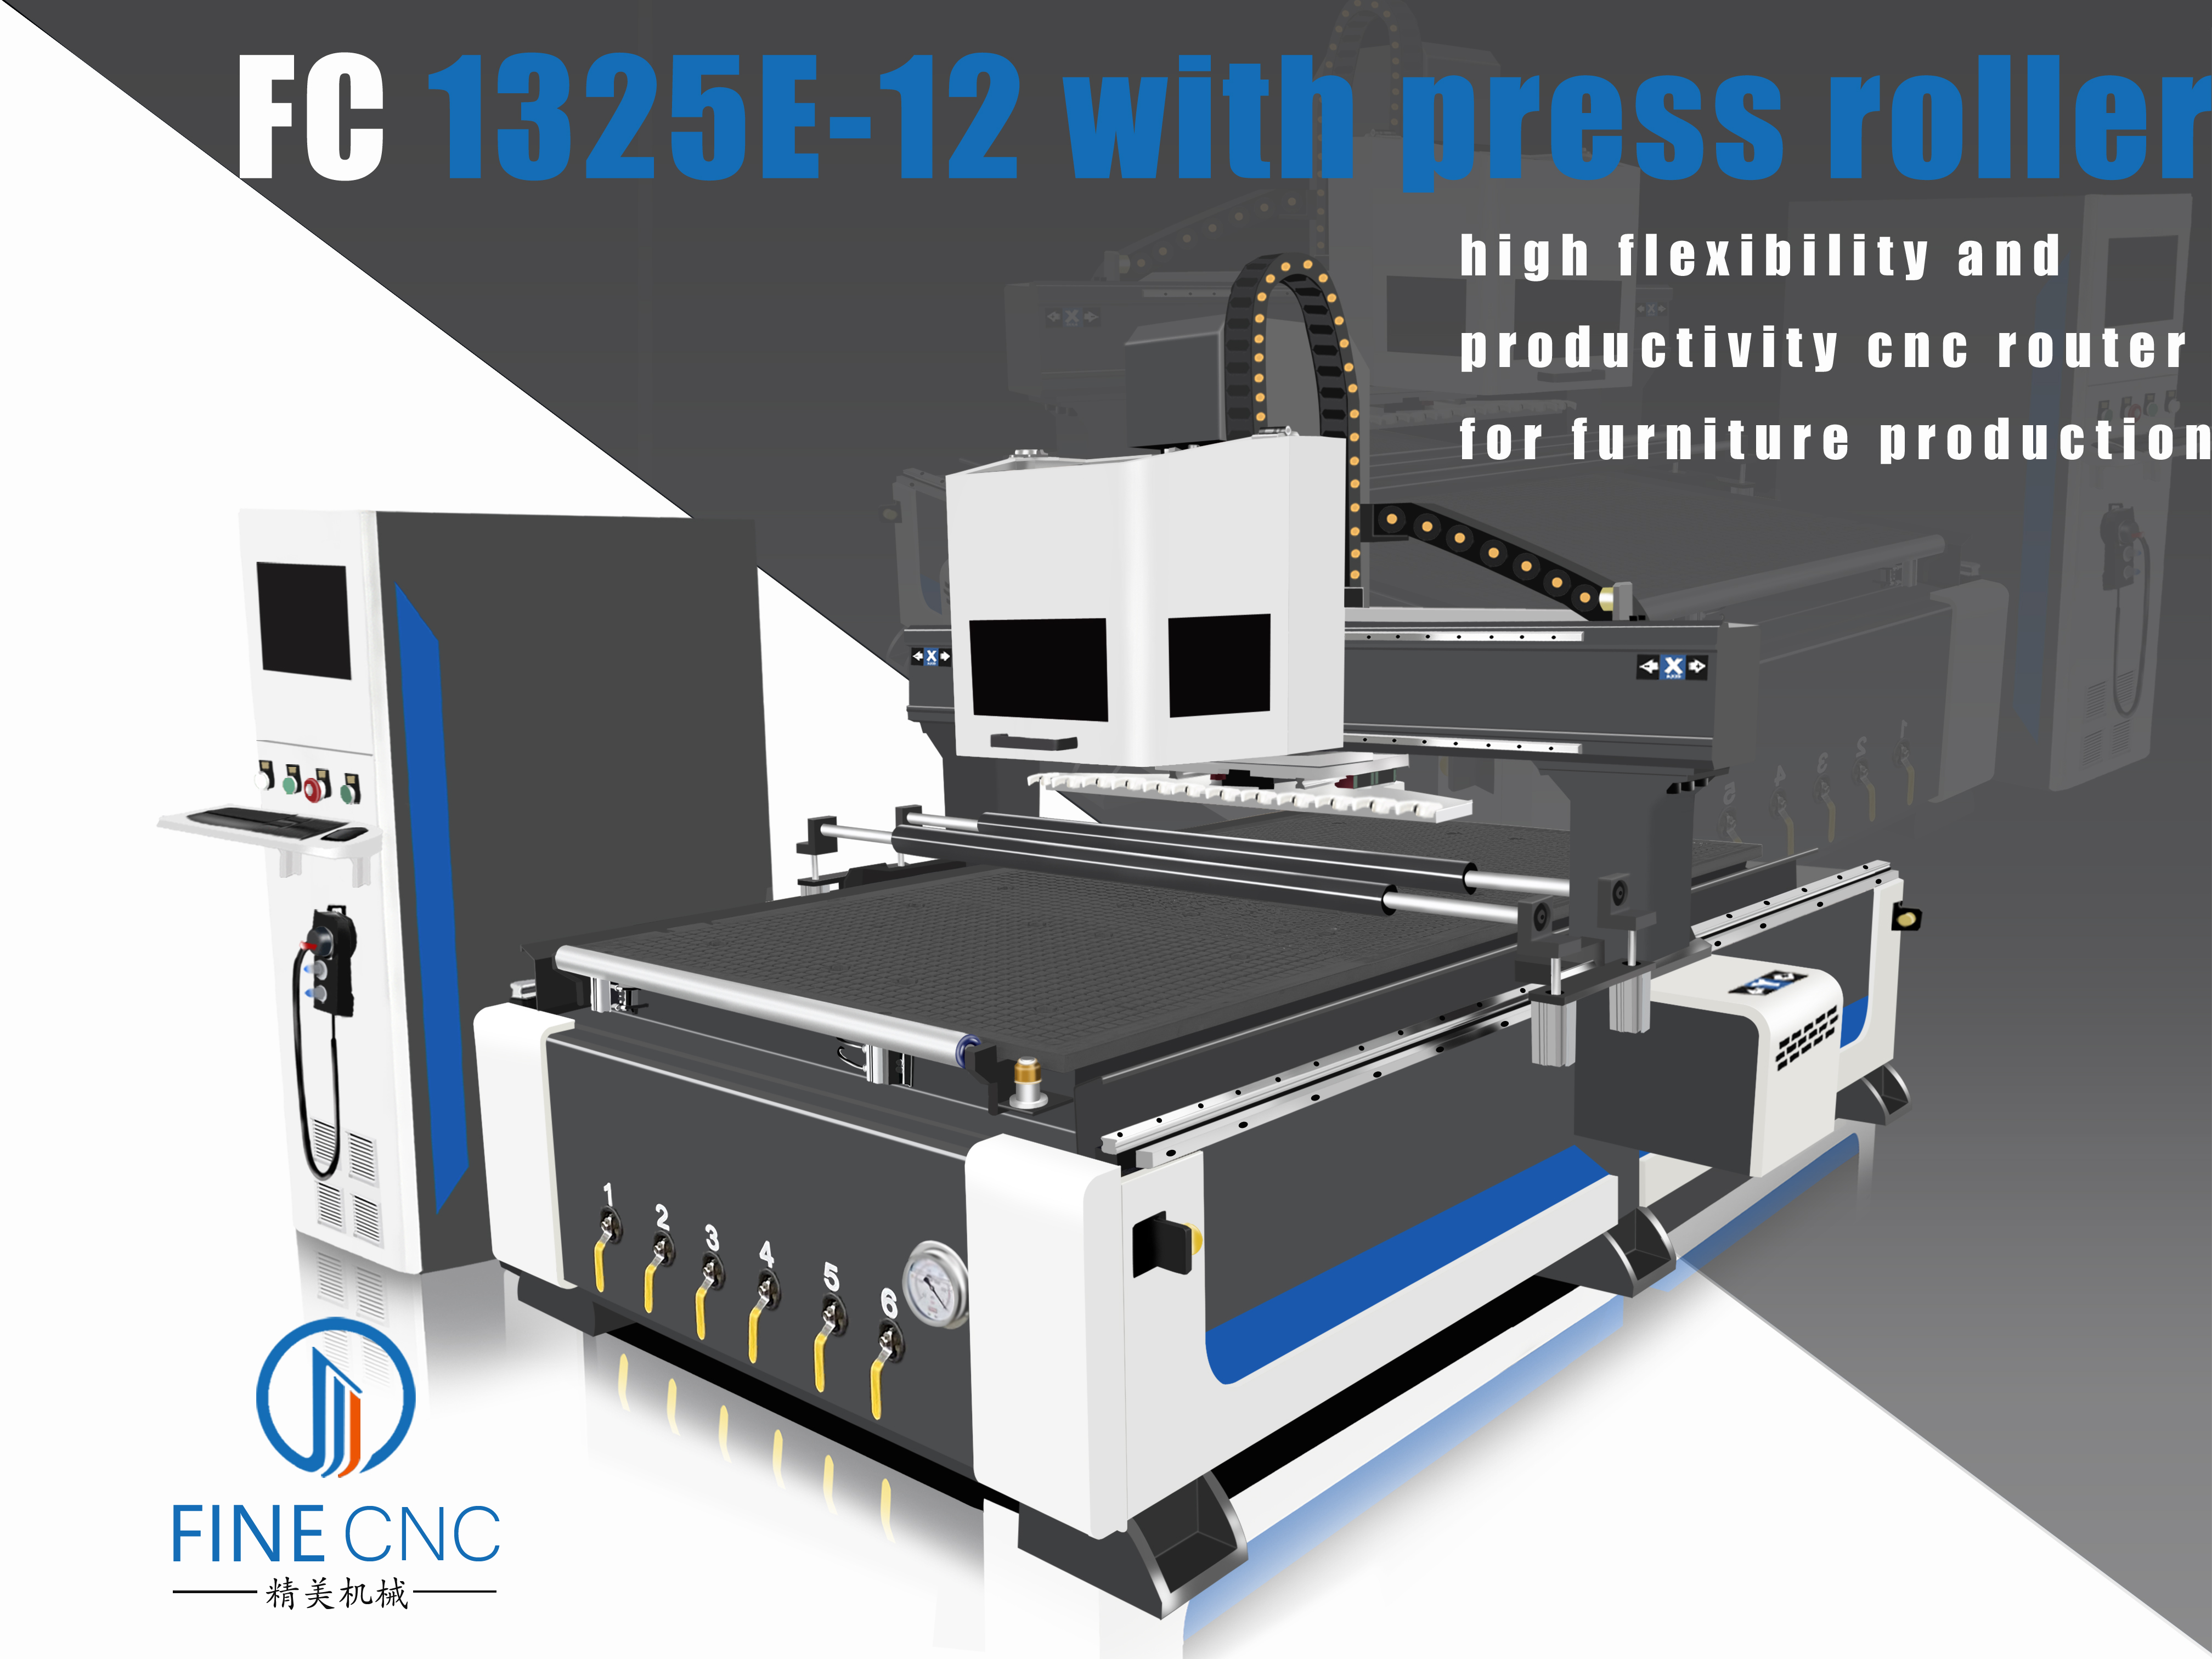 FC1325E-12 ATC CNC Router With Press Roller